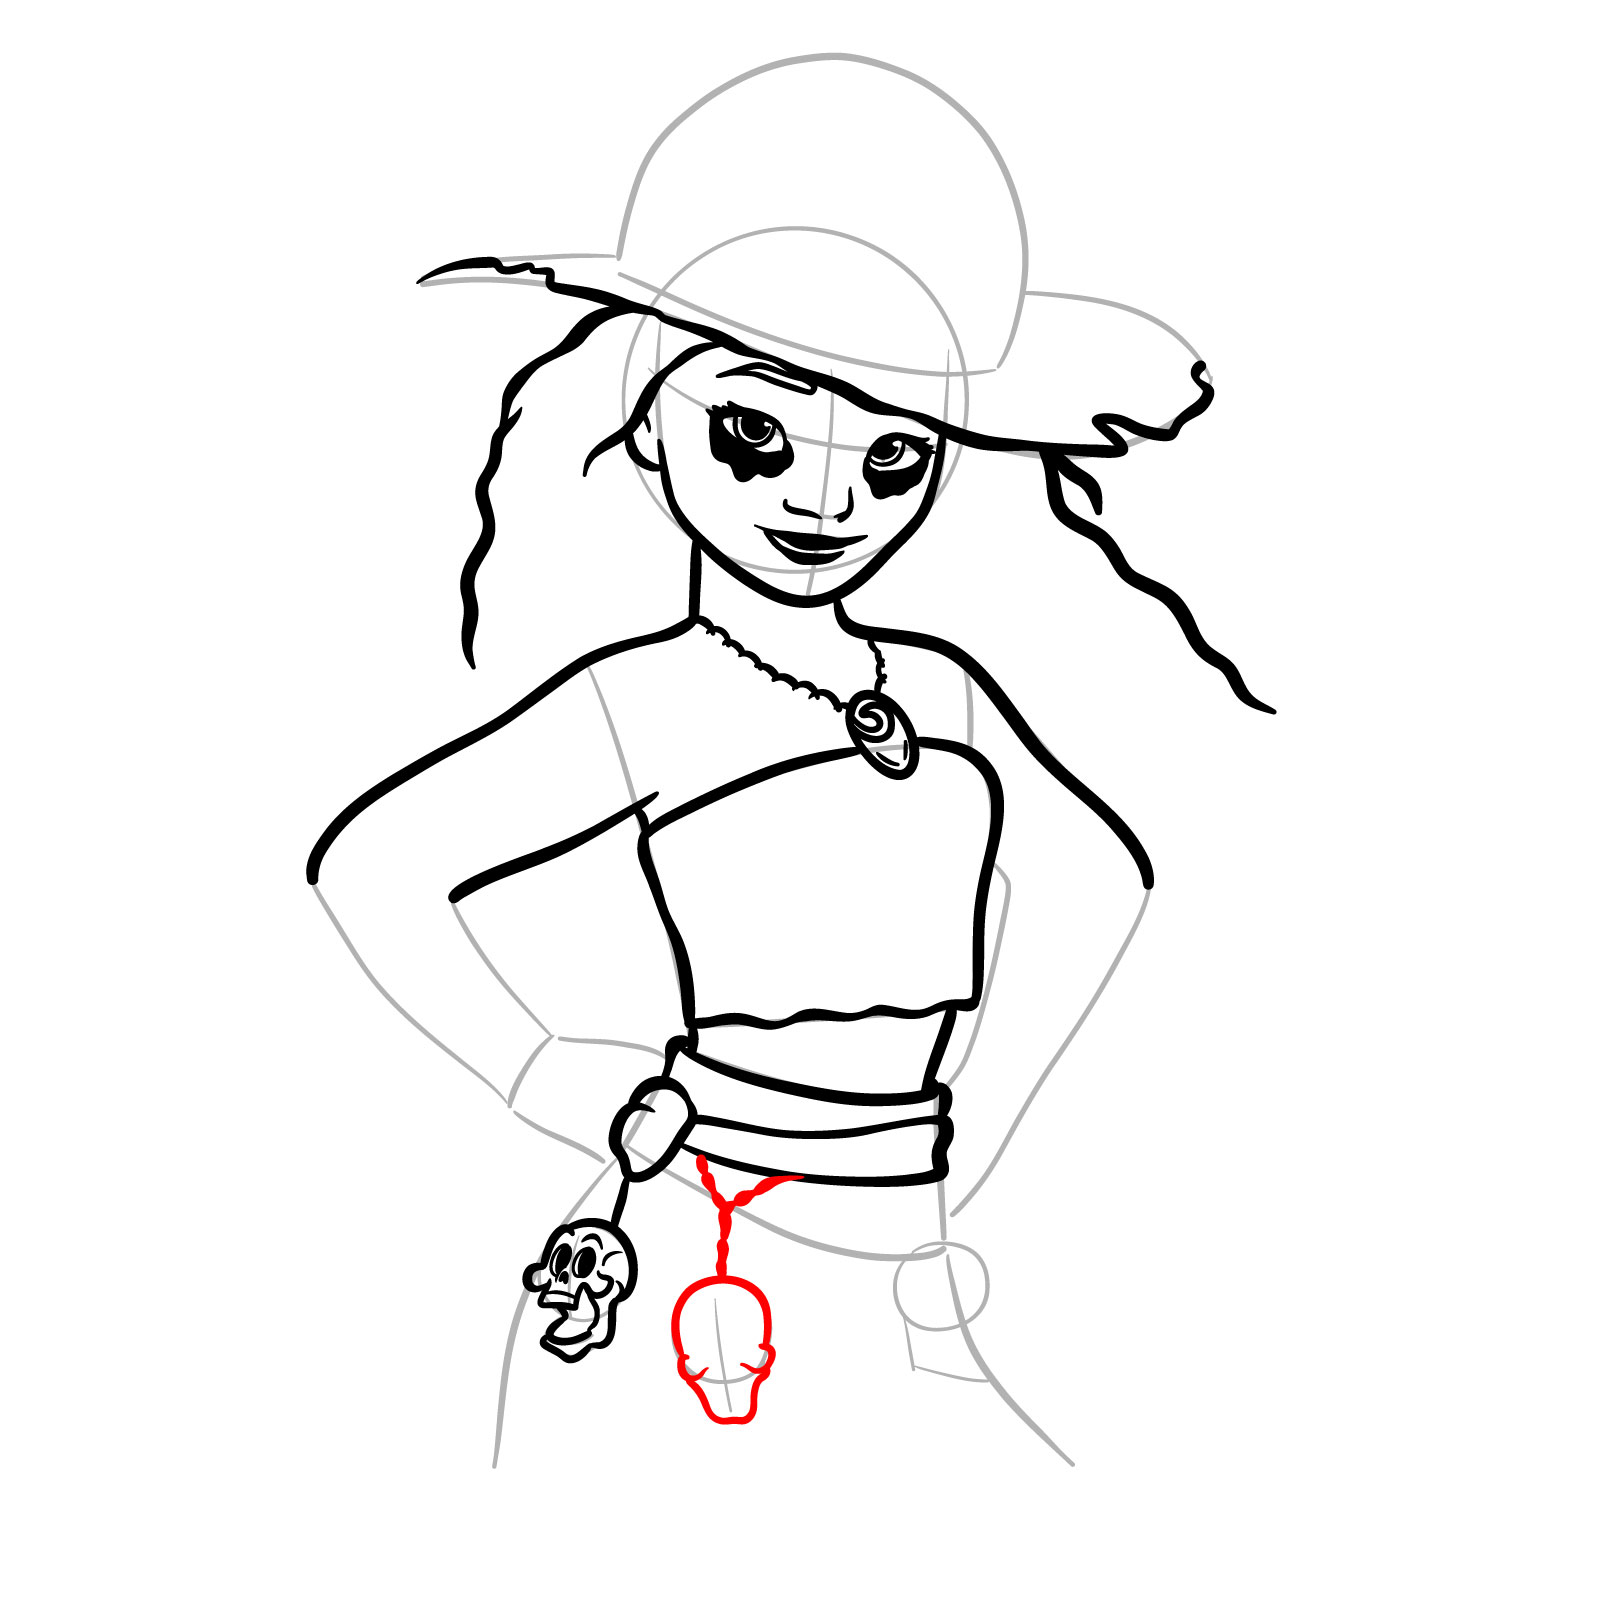 How to Draw Halloween Moana as a Staw Hat Pirate - step 21